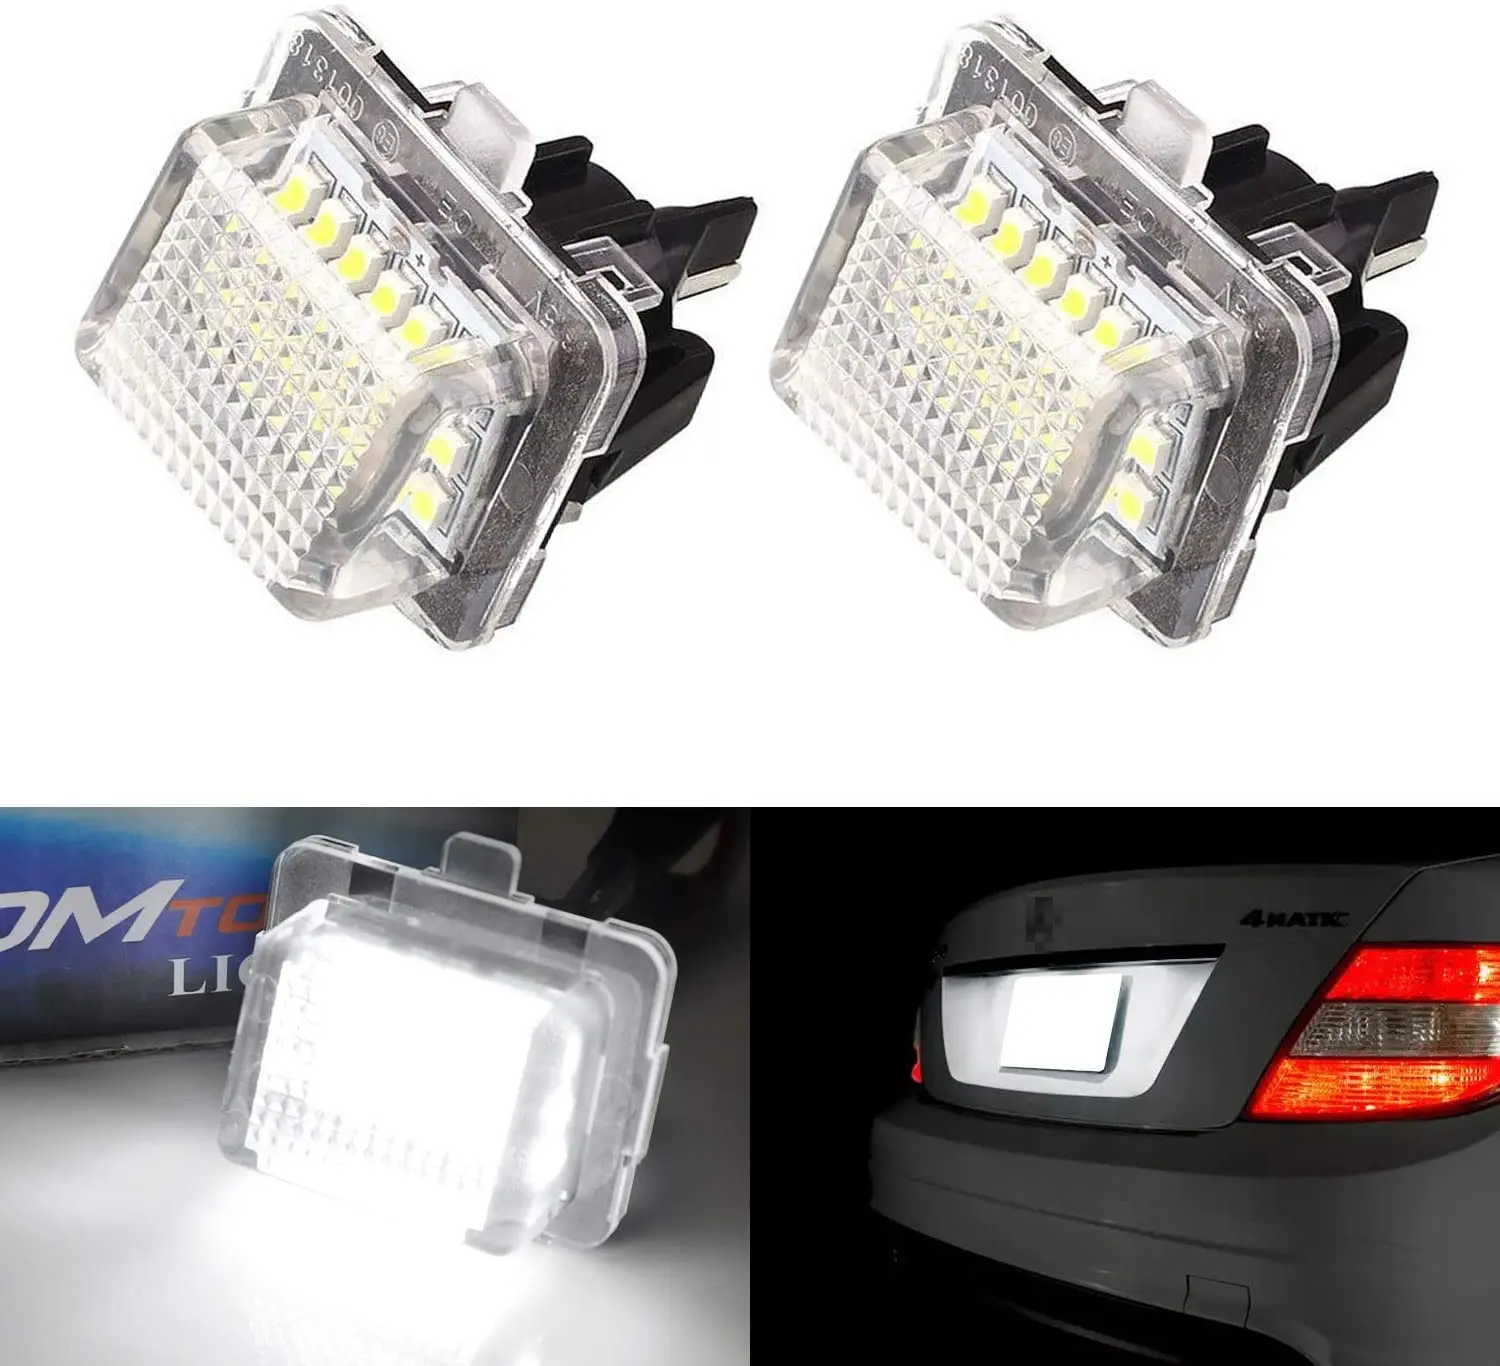 

2Pcs LED Number Plate Light License Plate Lamp For Mercedes Benz W204 Sedan Wagon 2007-2014 W212 C207 C216 W221 S204 Tail light